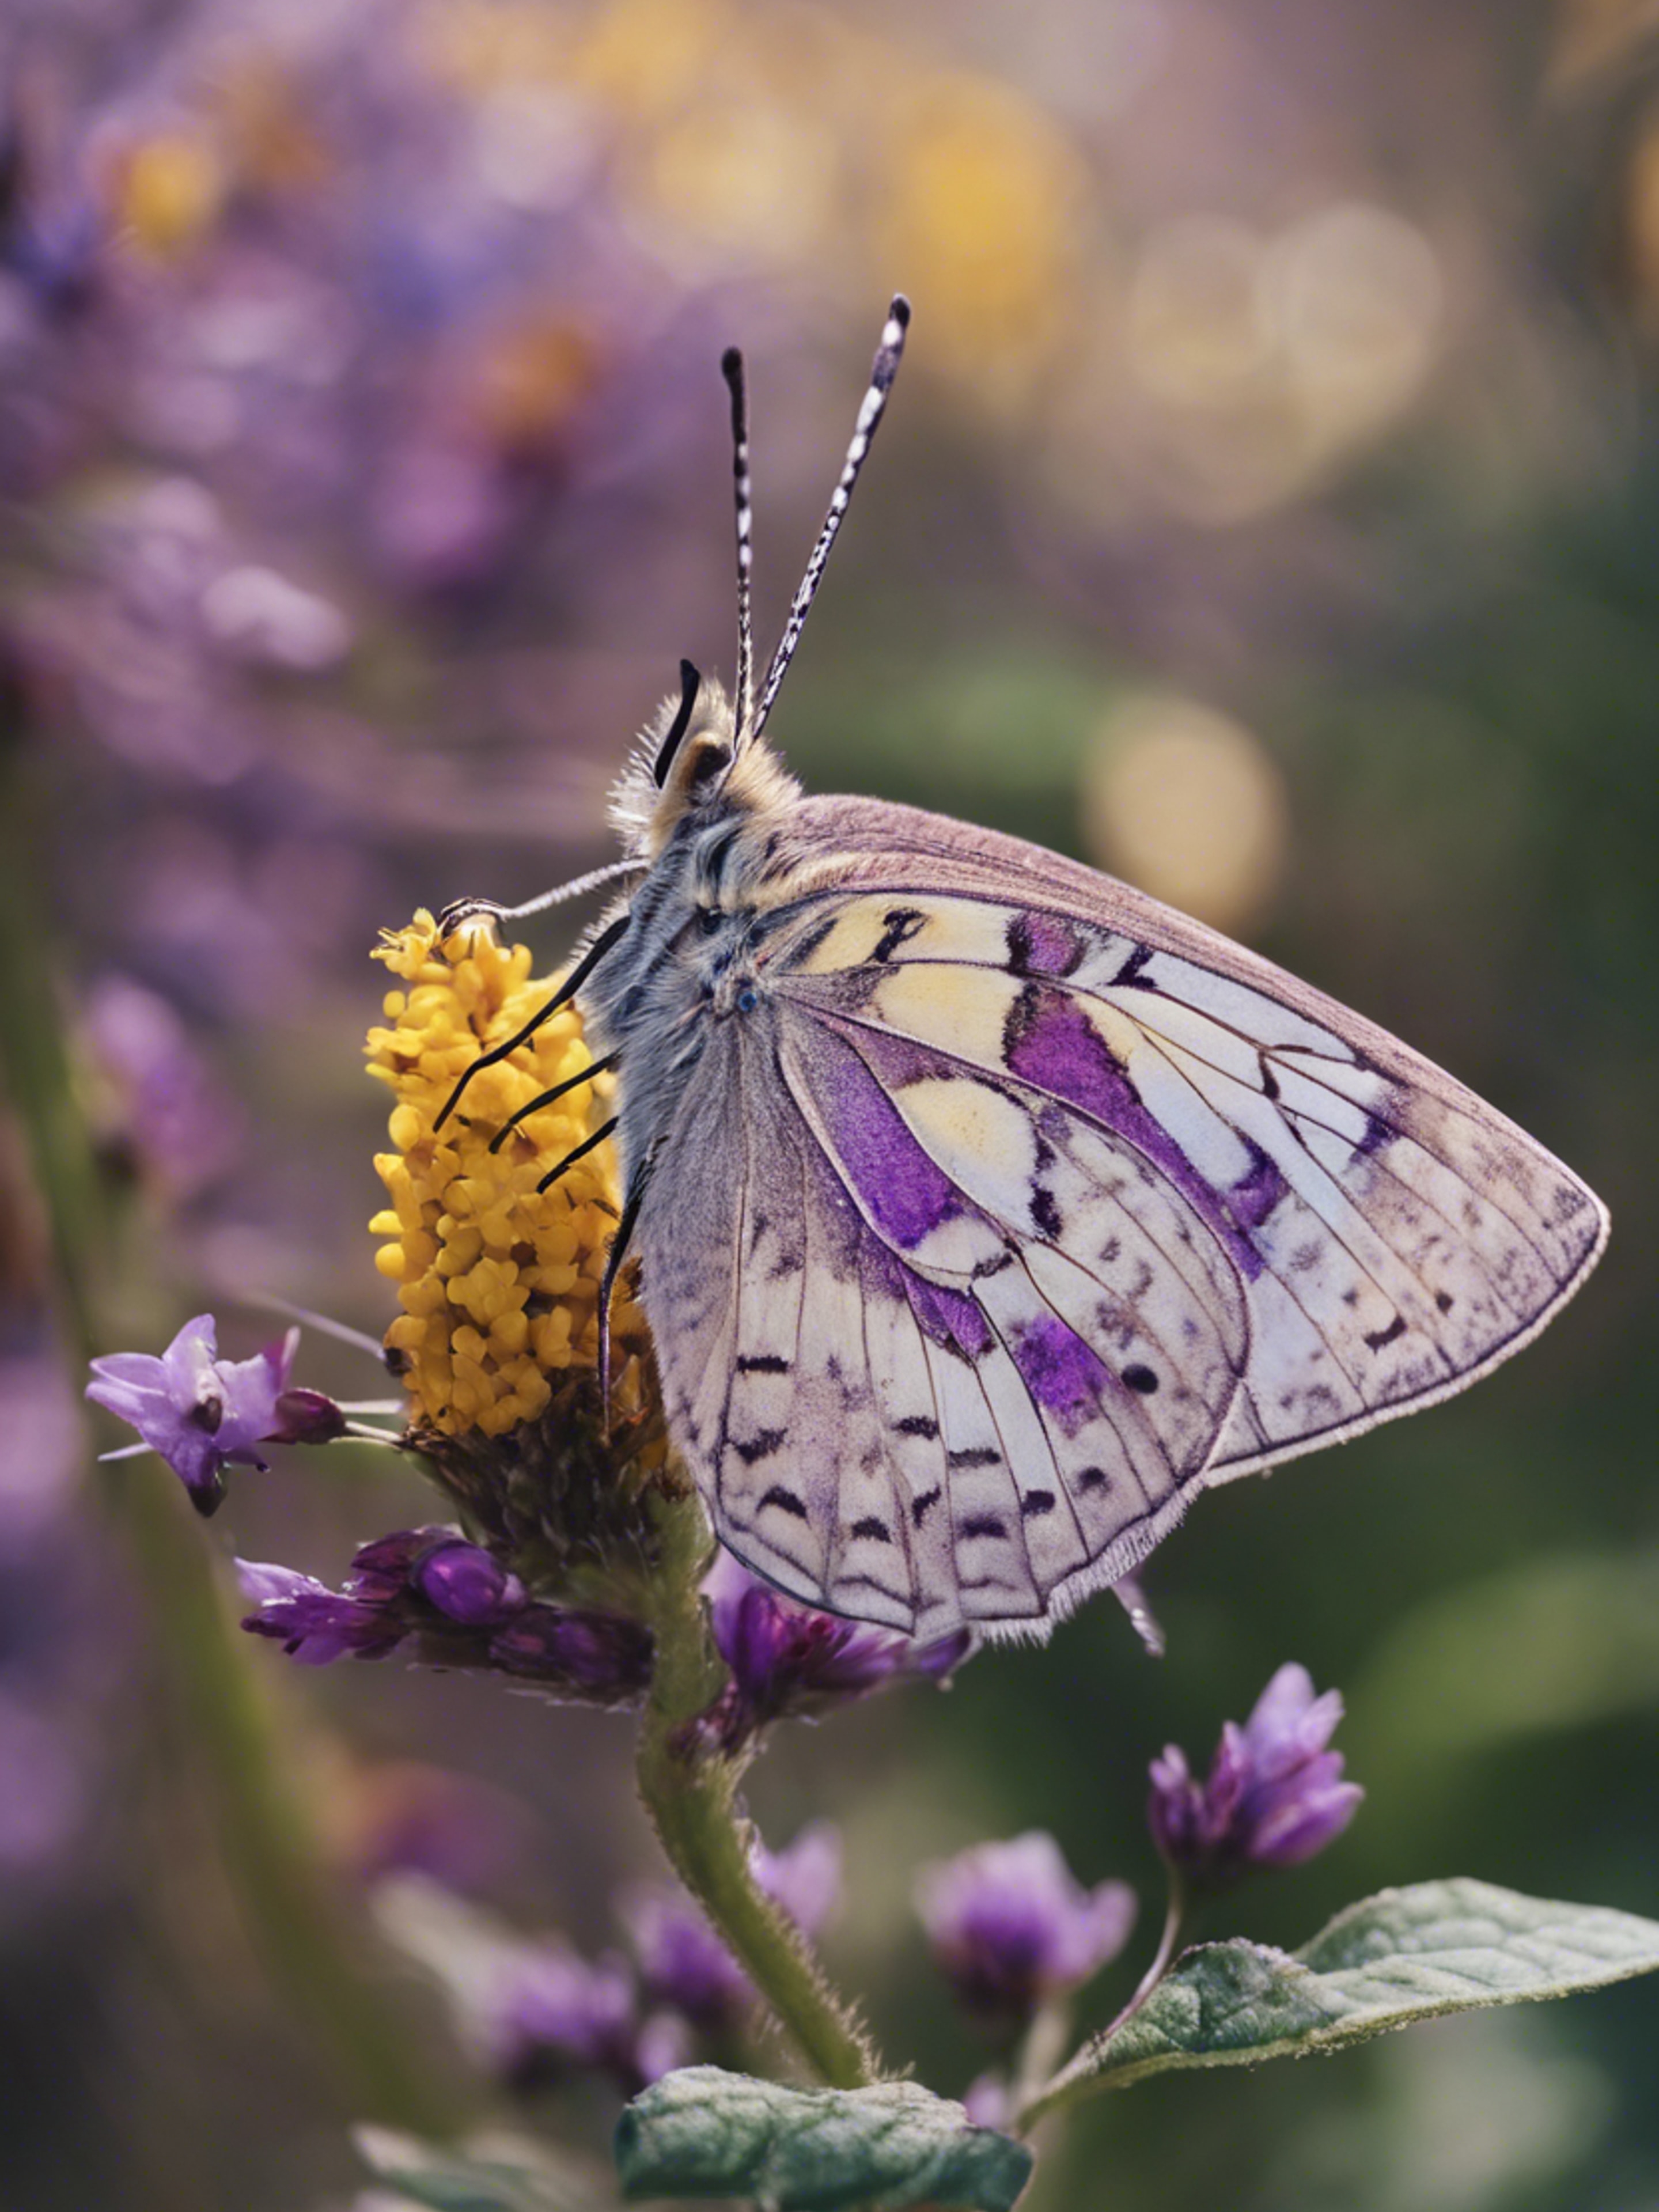 A beautiful butterfly with detailed purple and yellow wings resting on a blooming flower. Обои[3e976ae7be264a5da695]